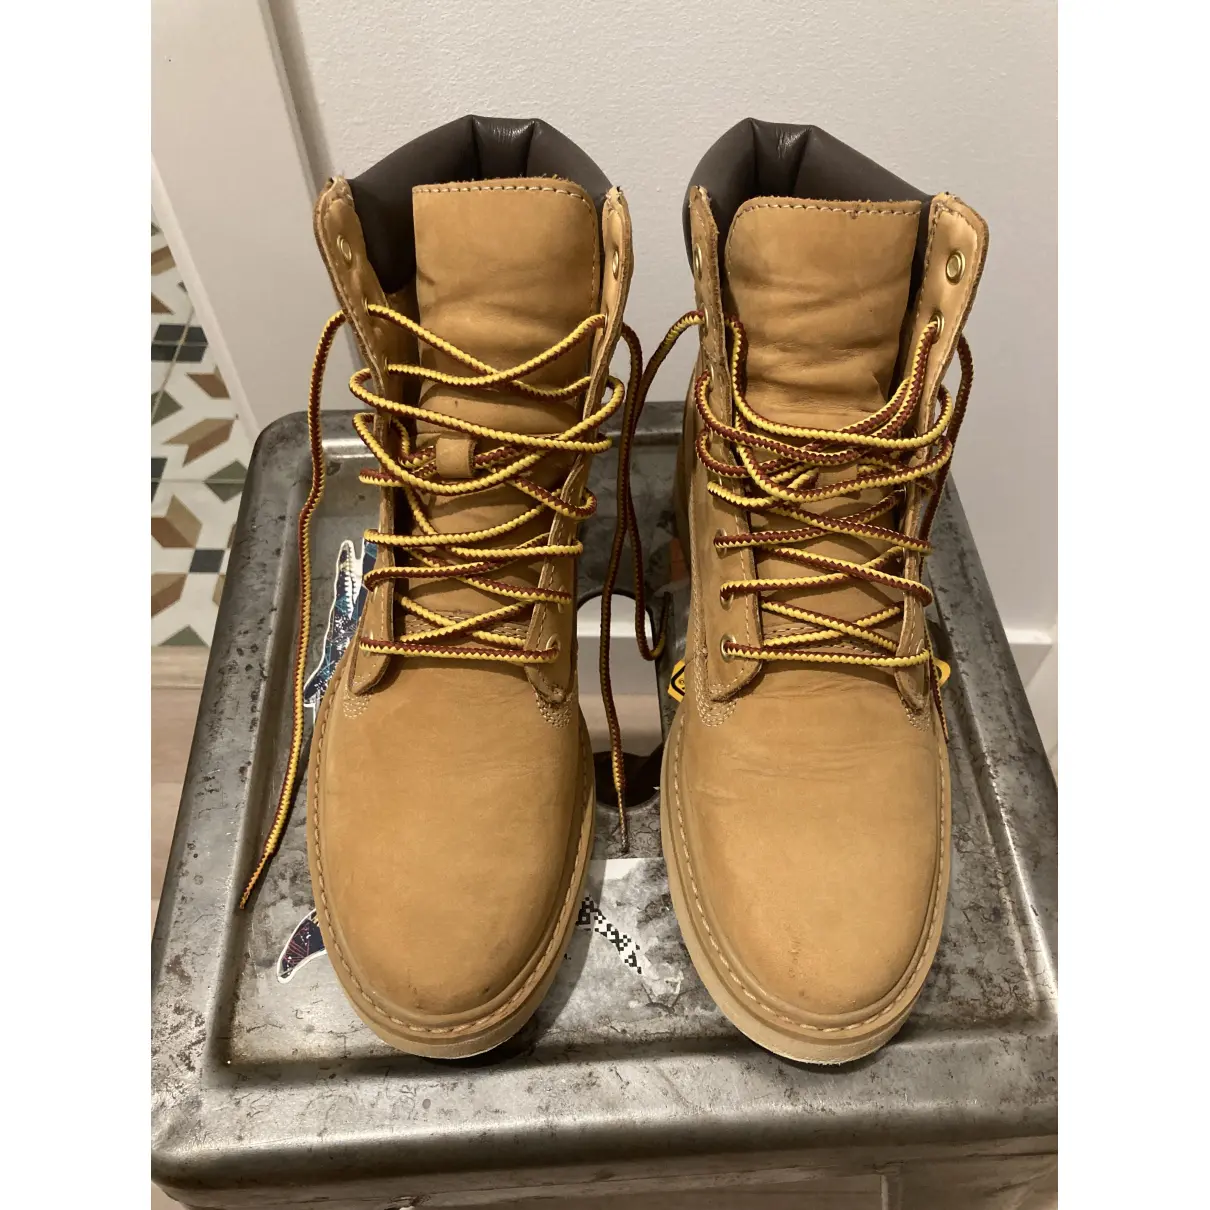 Buy Timberland Lace up boots online